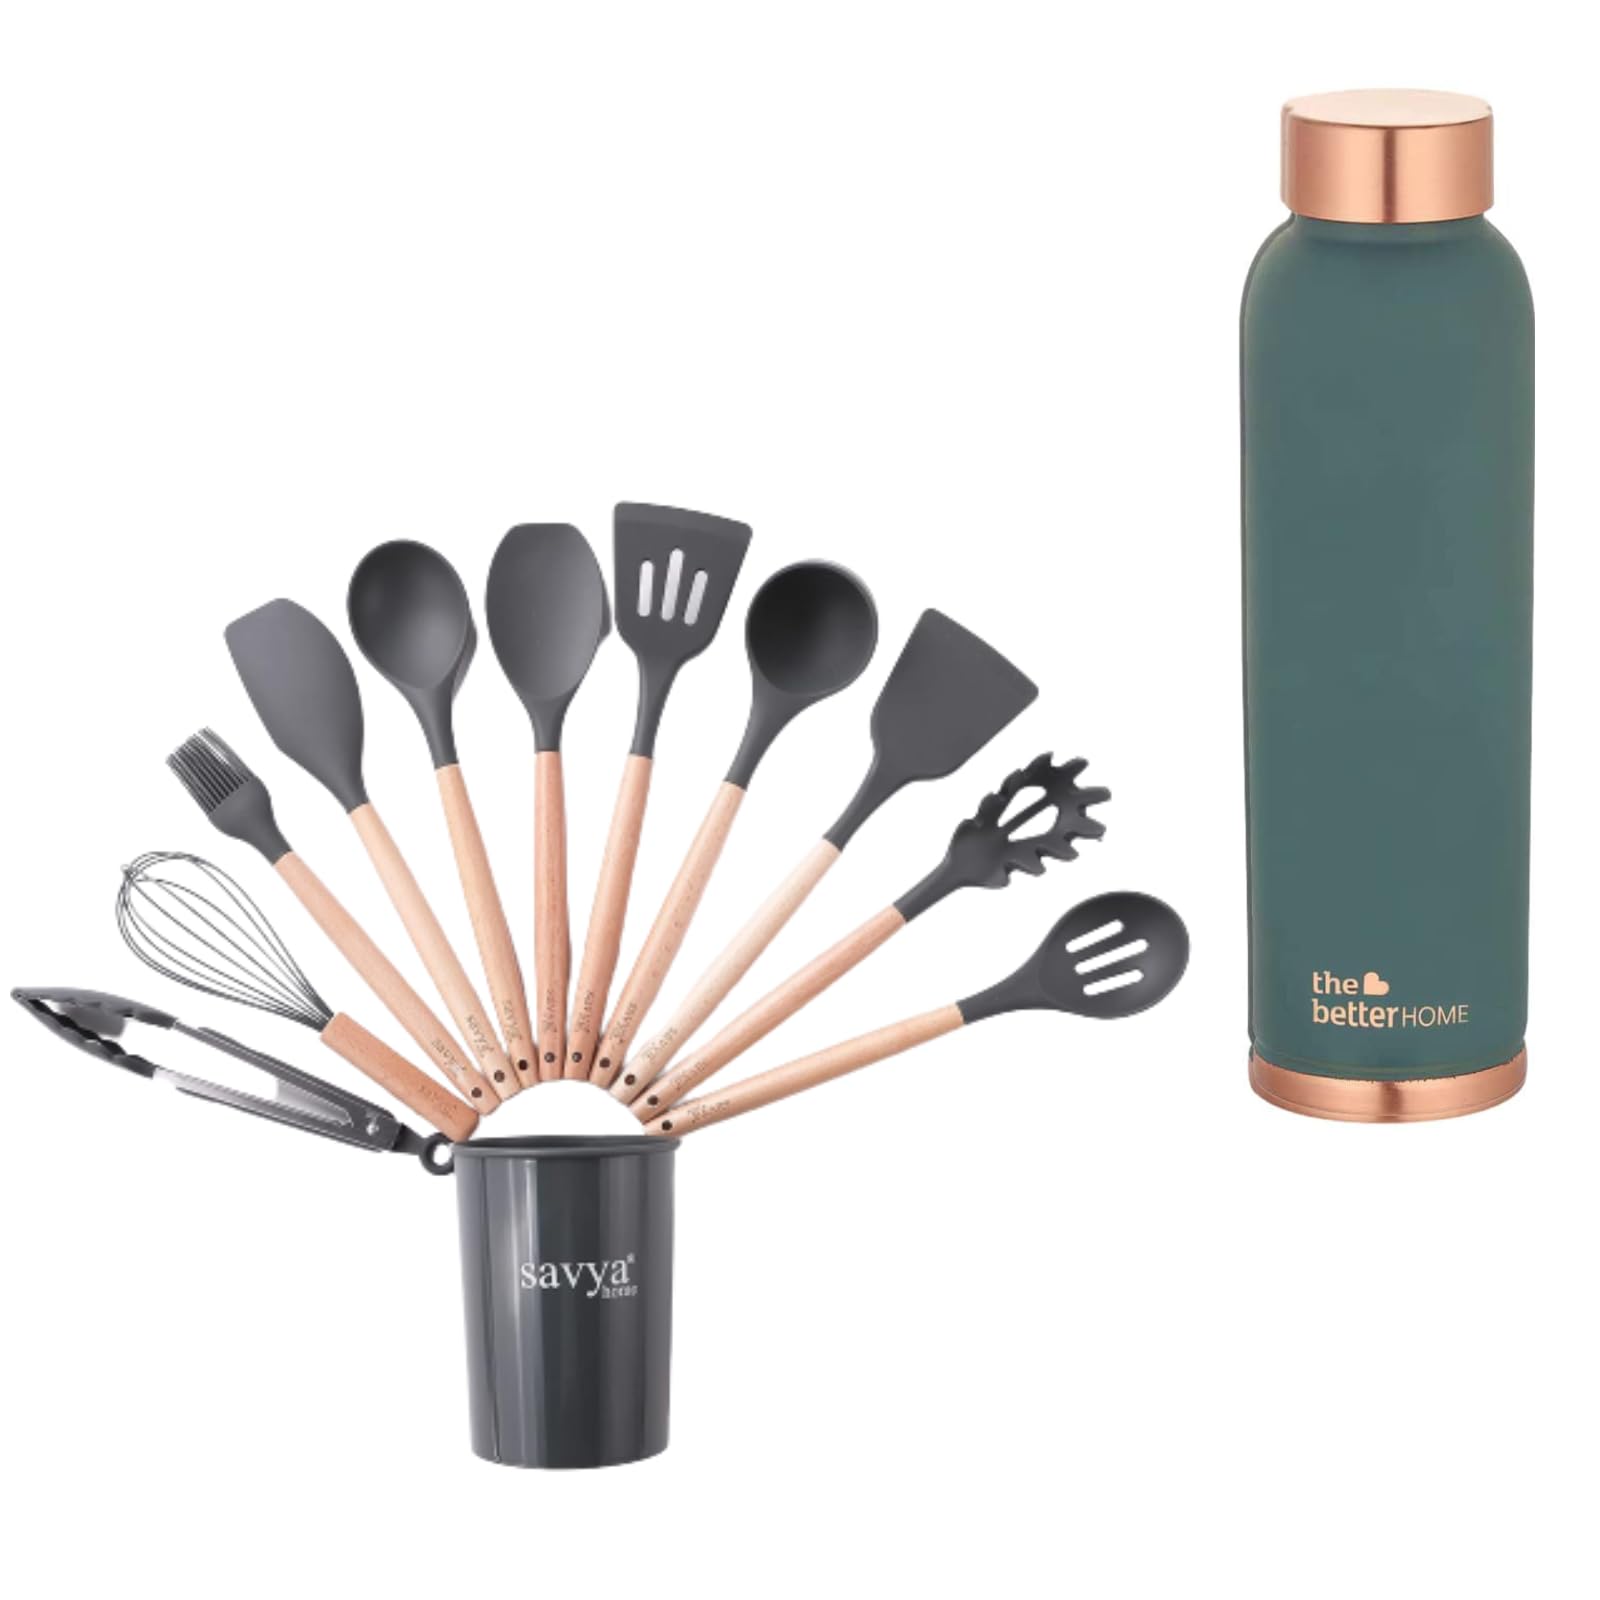 The Better Home 100% Pure Copper Water Bottle 1 Litre, Teal & Savya Home 12 pcs Silicon Spatula Set, Grey